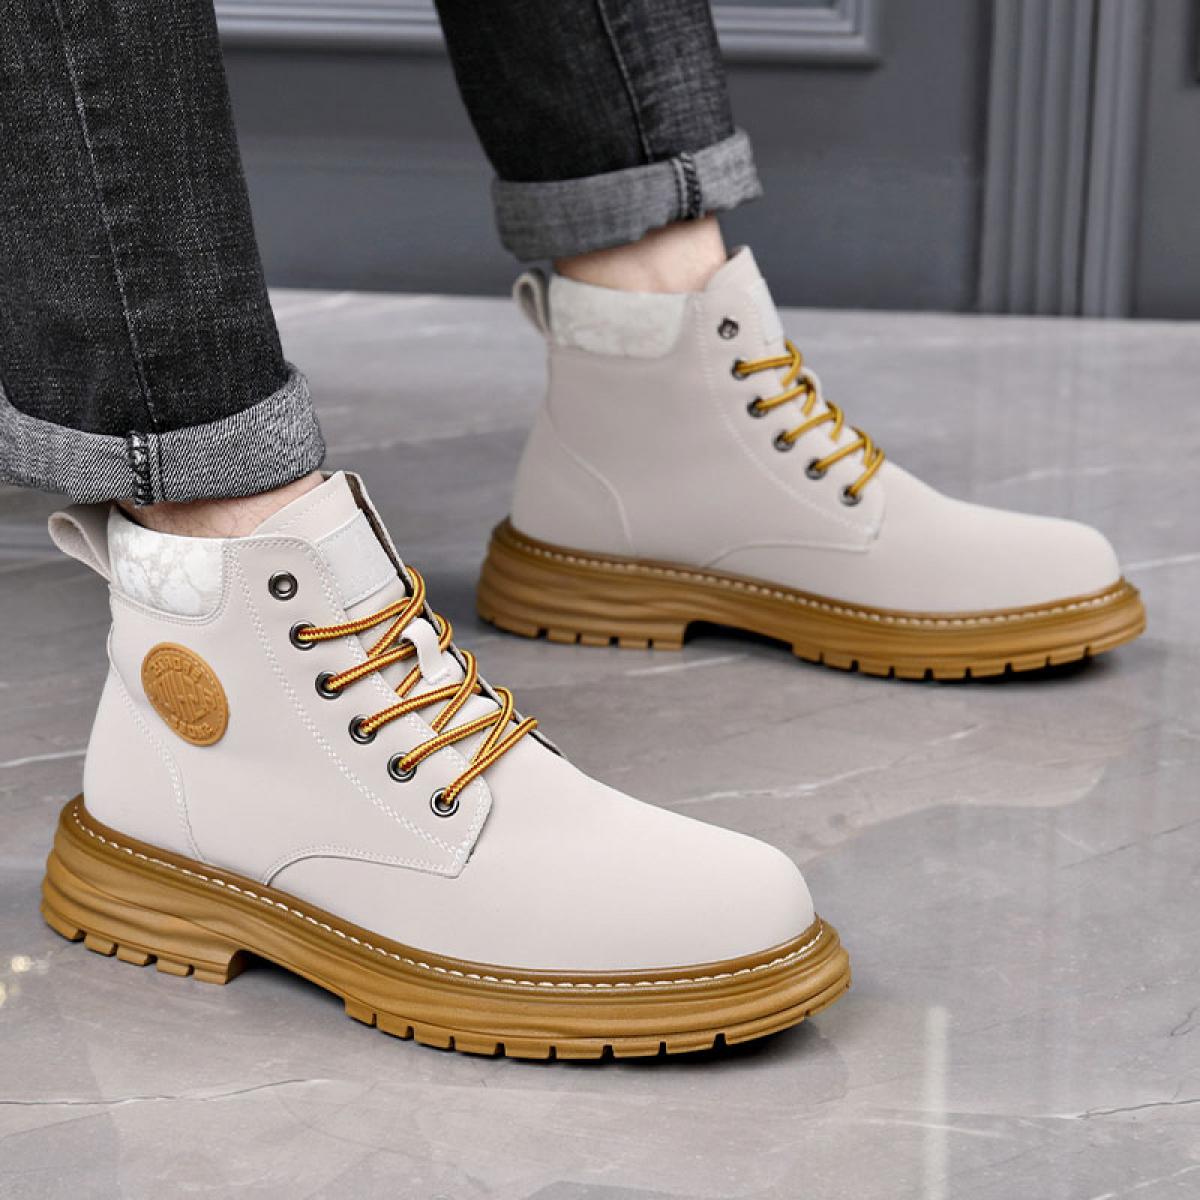 Martin Boots Men's Soft Leather Winter British Style High Top Leather Outdoor Cotton With Plush Work Clothes Boots Low C